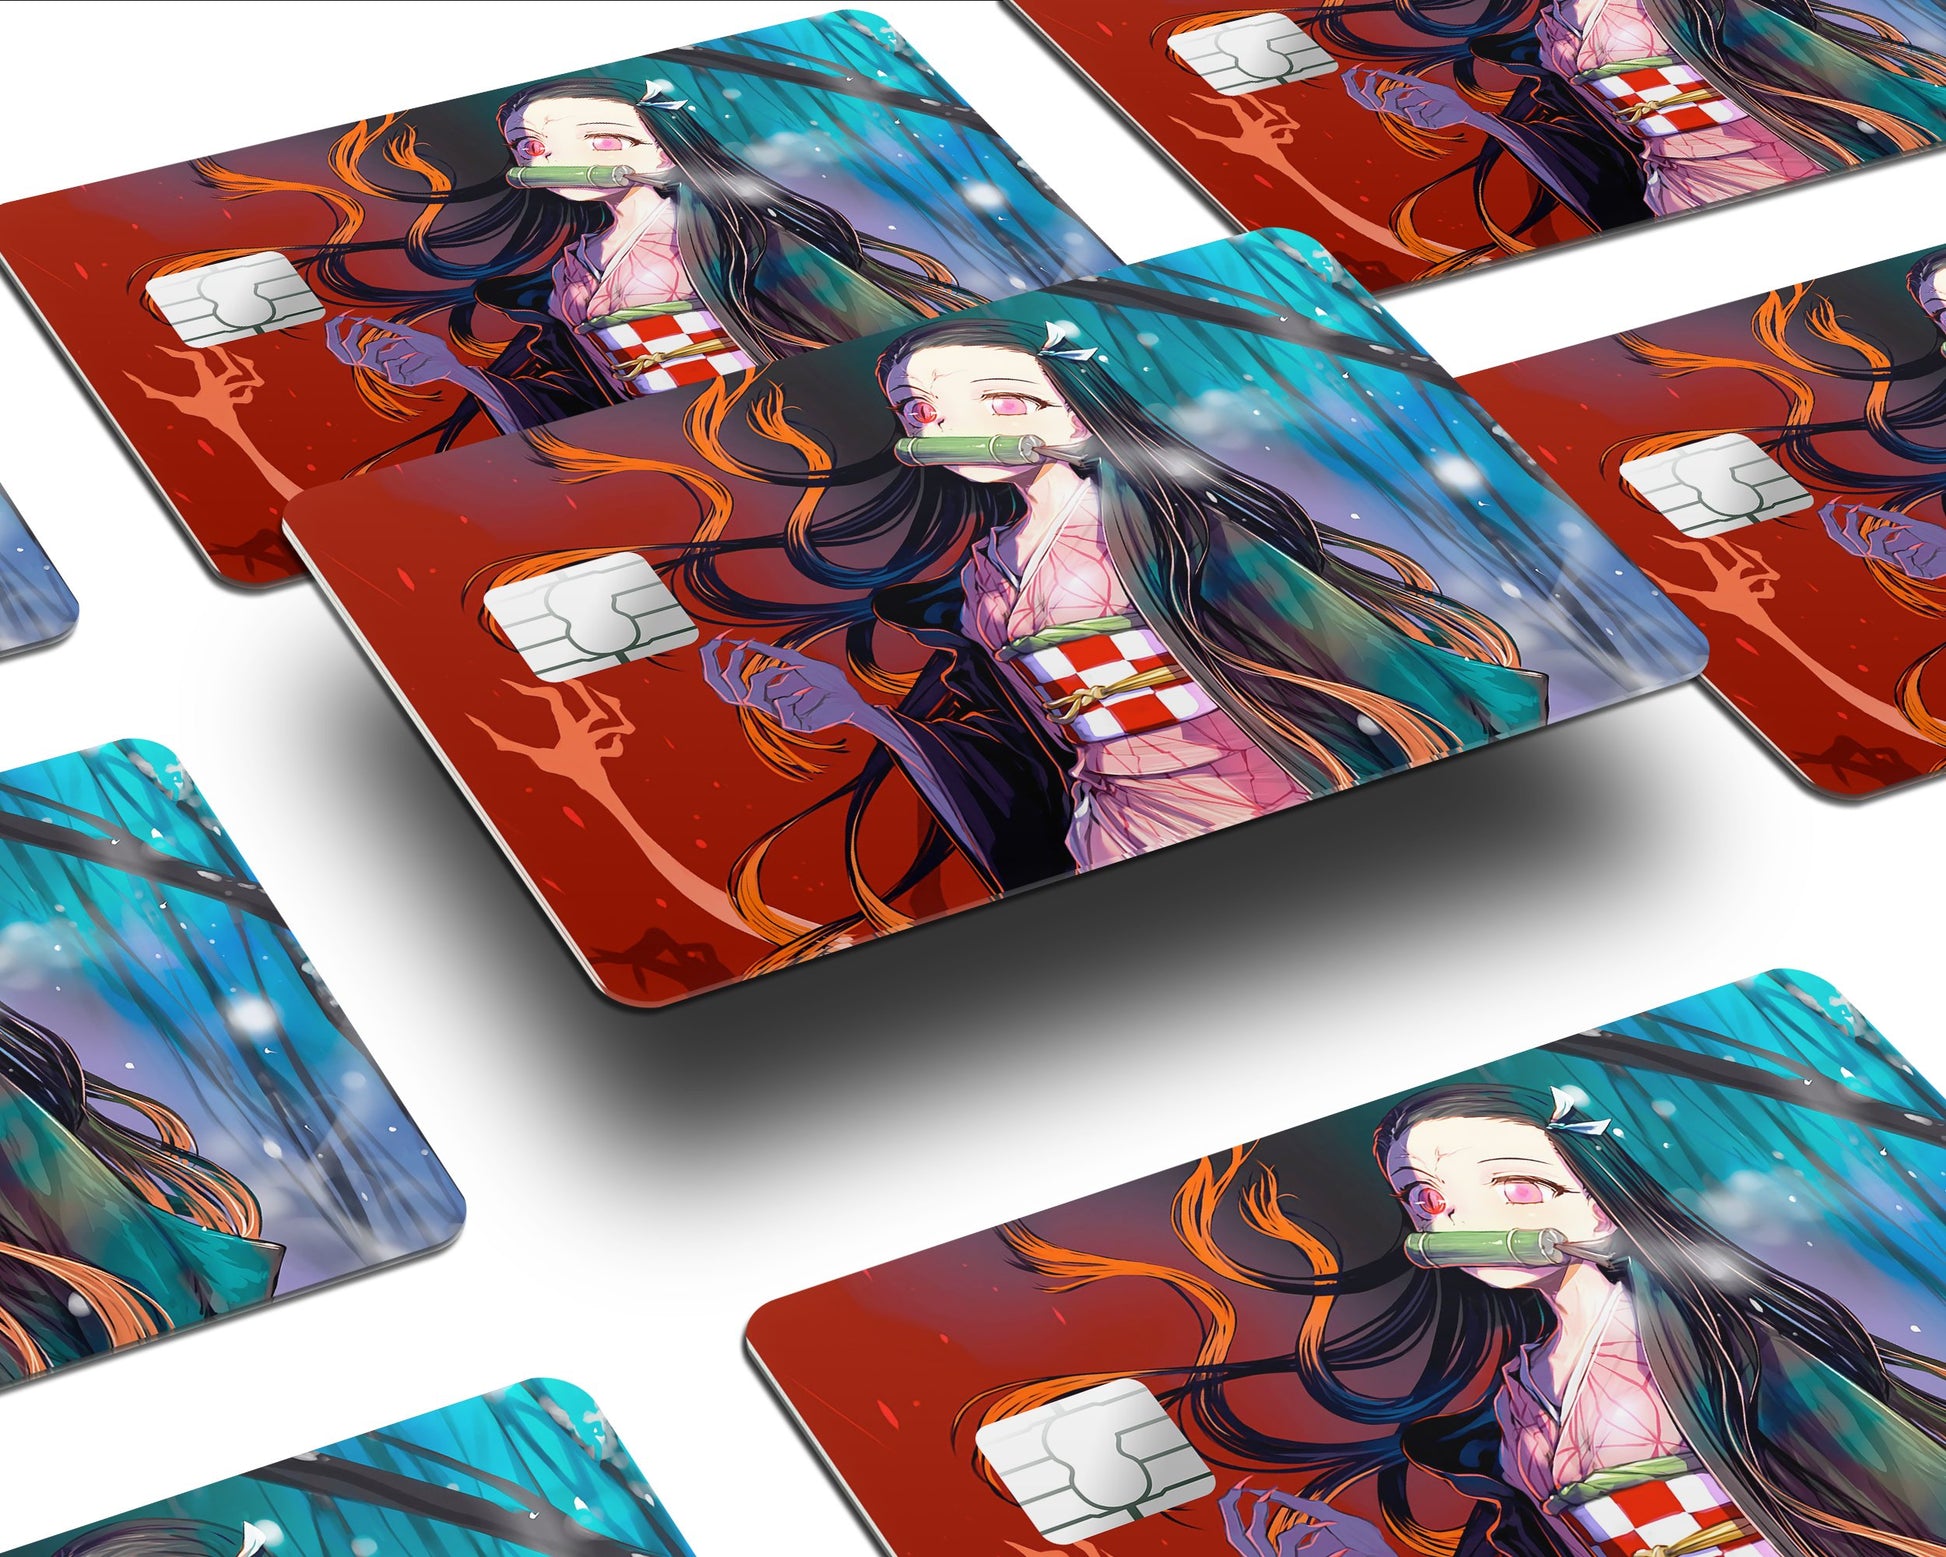  Holographic Bleach Credit Card Skin Sticker Cover/Debit Cards  Stickers Decal Anime (4) : Office Products